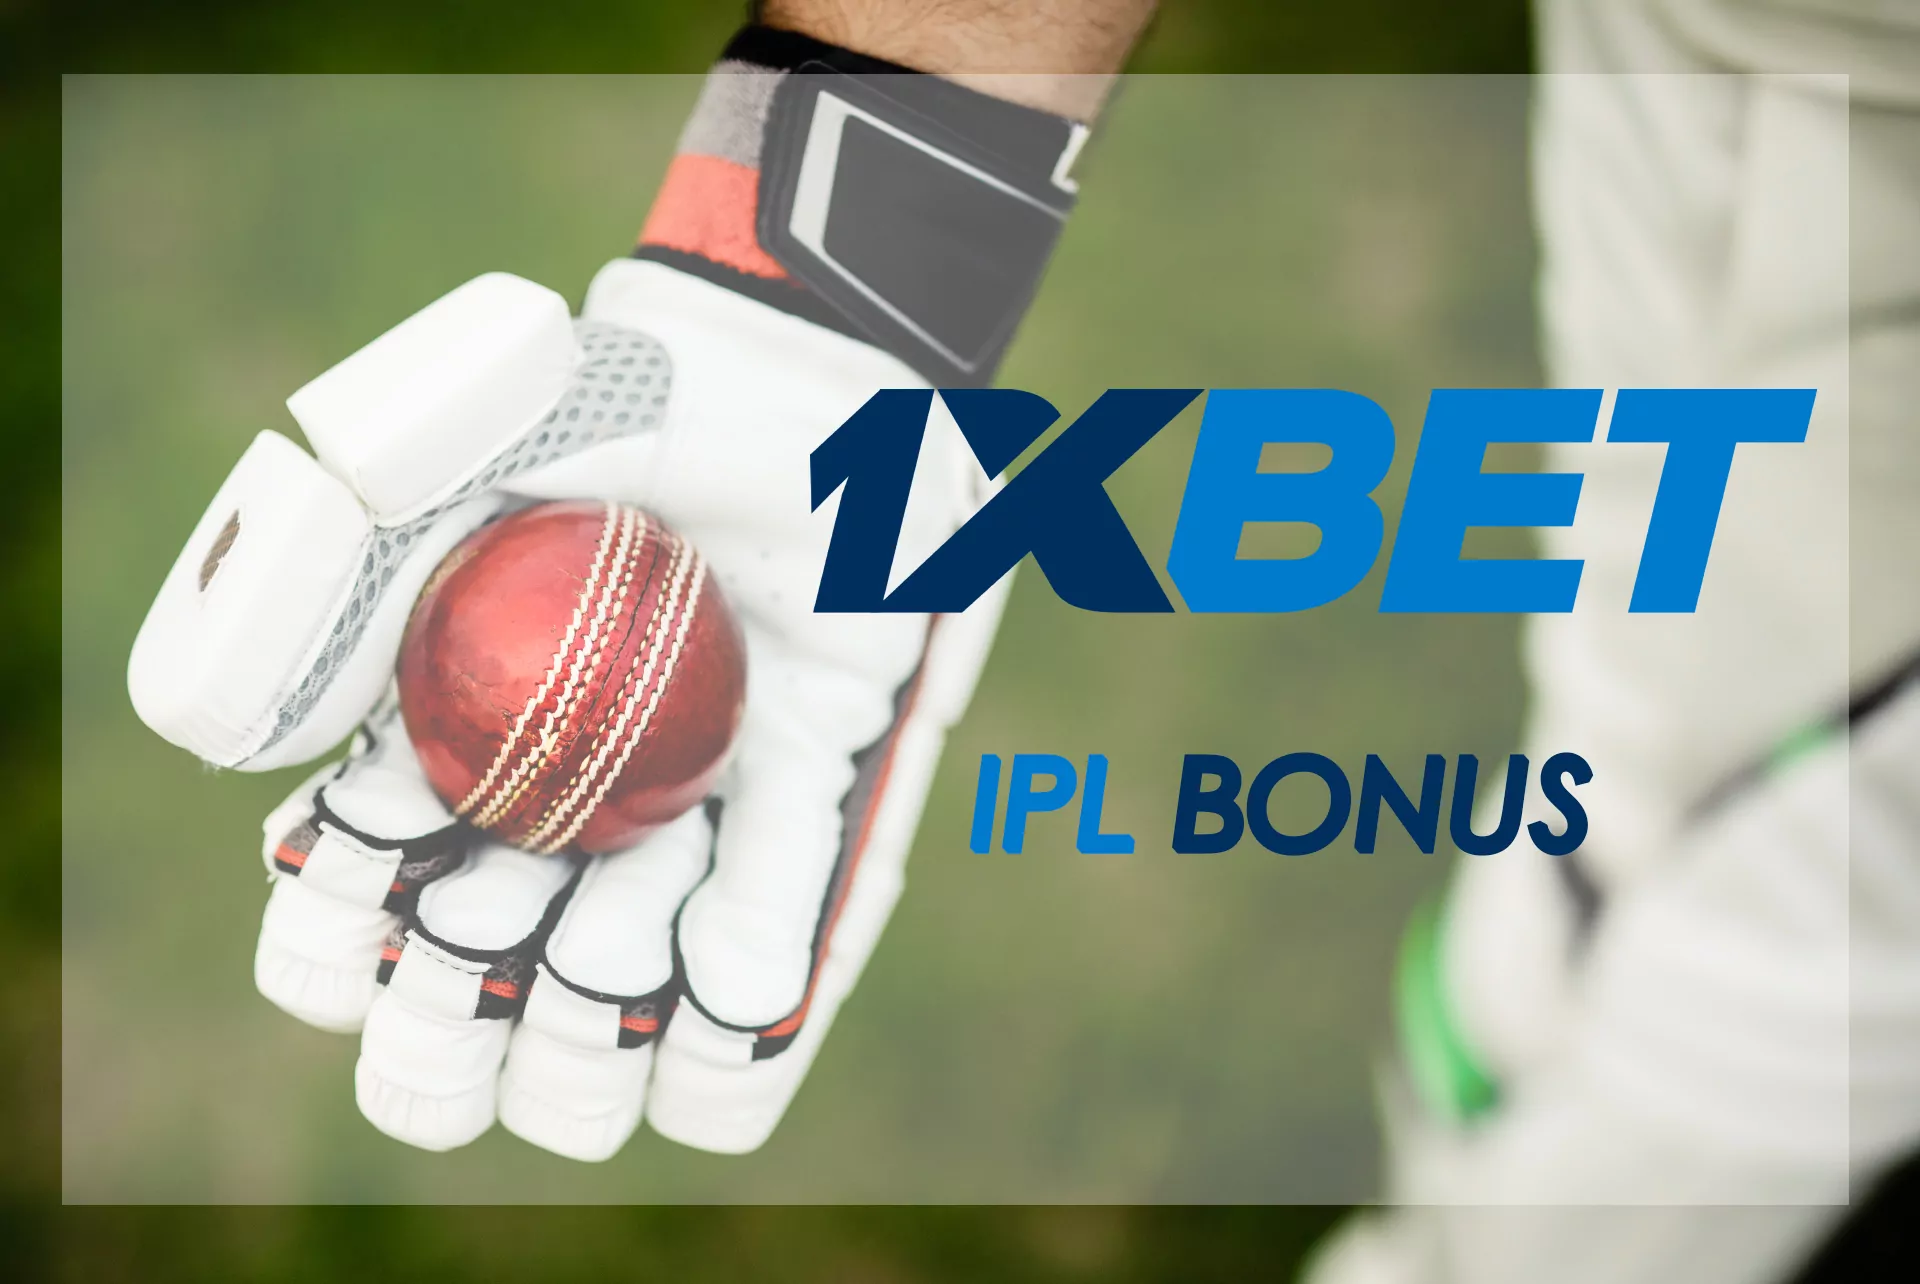 During the IPL, 1xBet offers special bonuses for cricket betting.